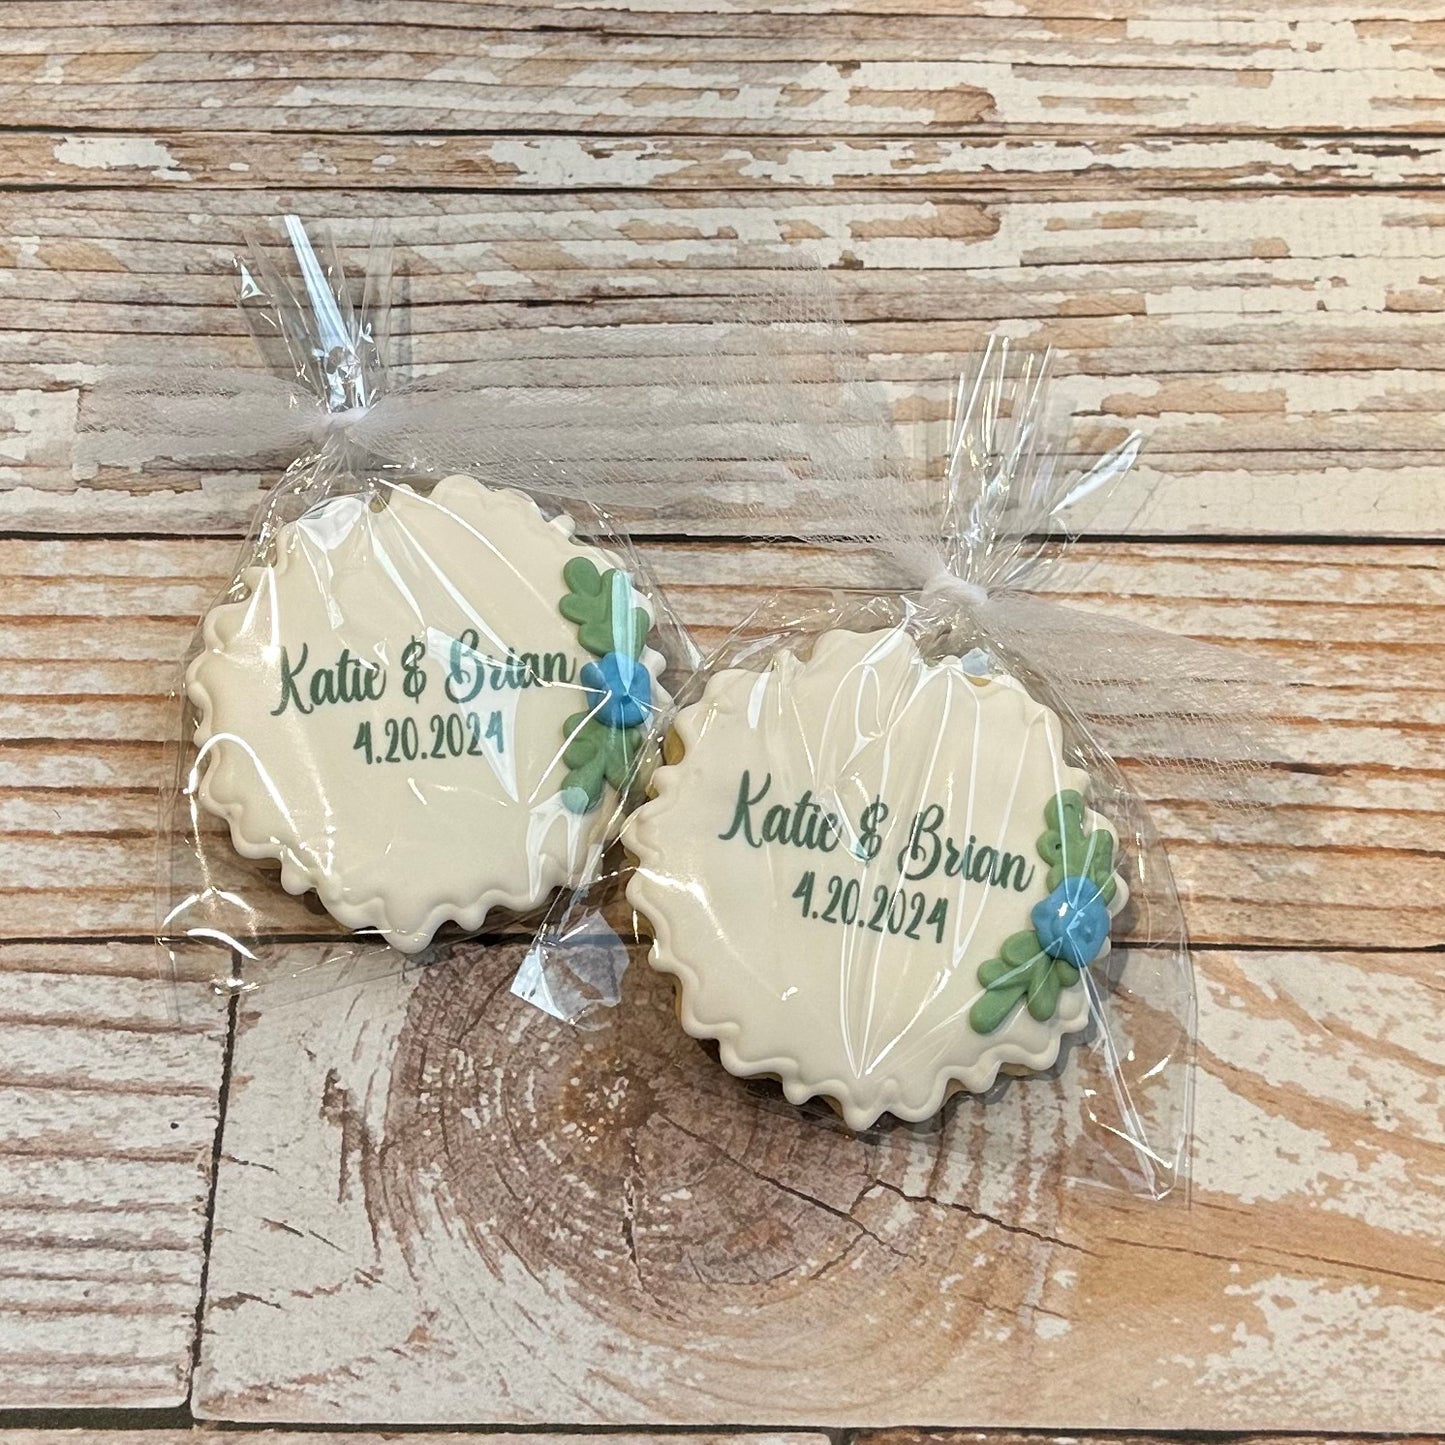 Plaque Shaped Floral Bridal Engagement Cookies w/Couple's Names & Wedding Date-- 12 Count